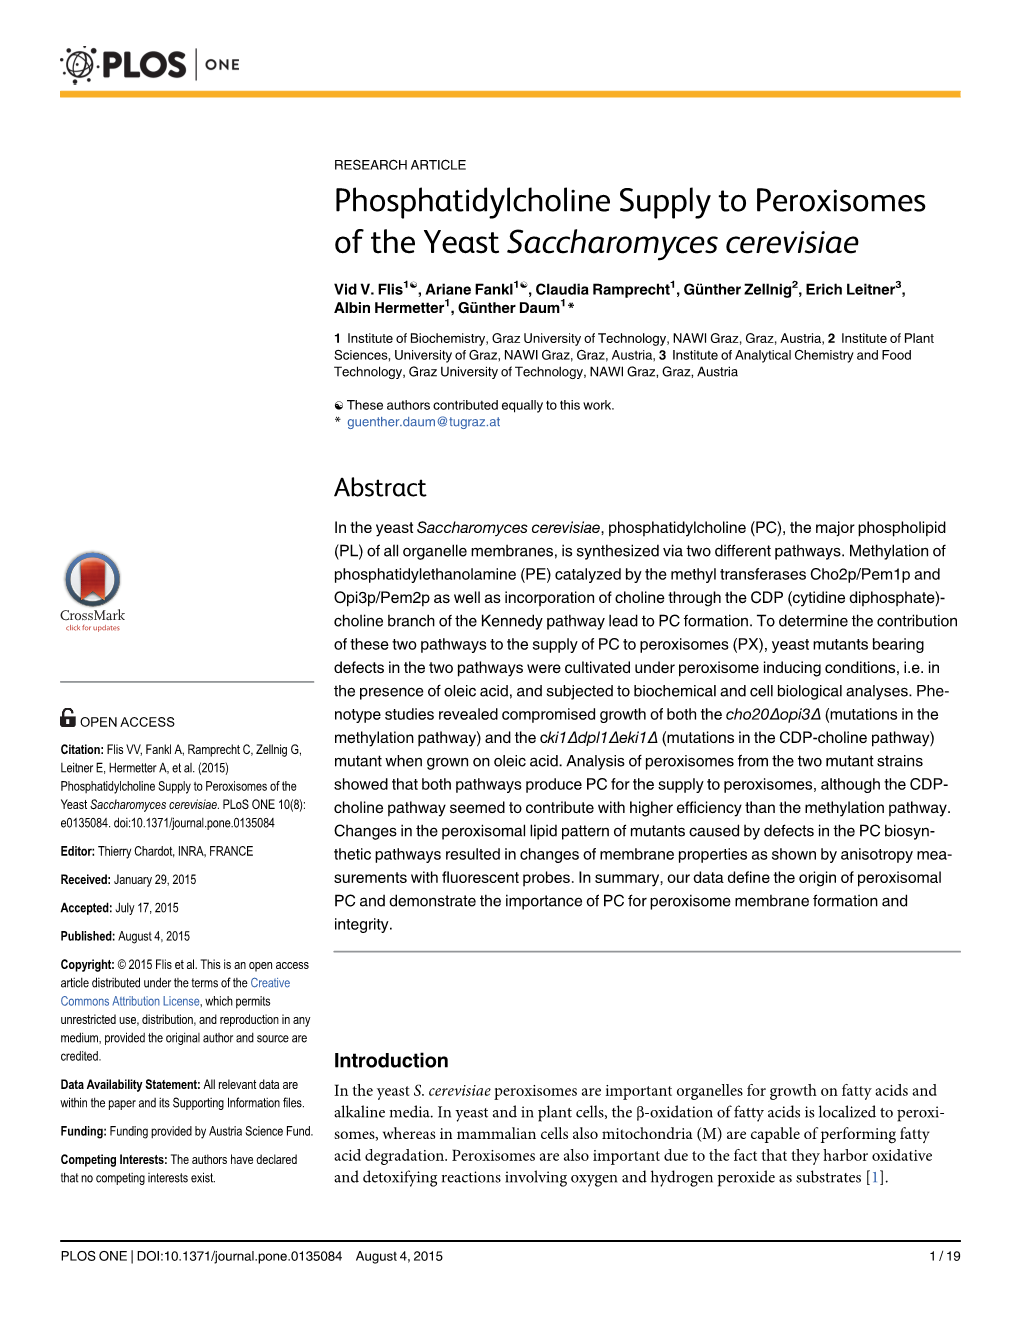 Phosphatidylcholine Supply to Peroxisomes of the Yeast Saccharomyces Cerevisiae